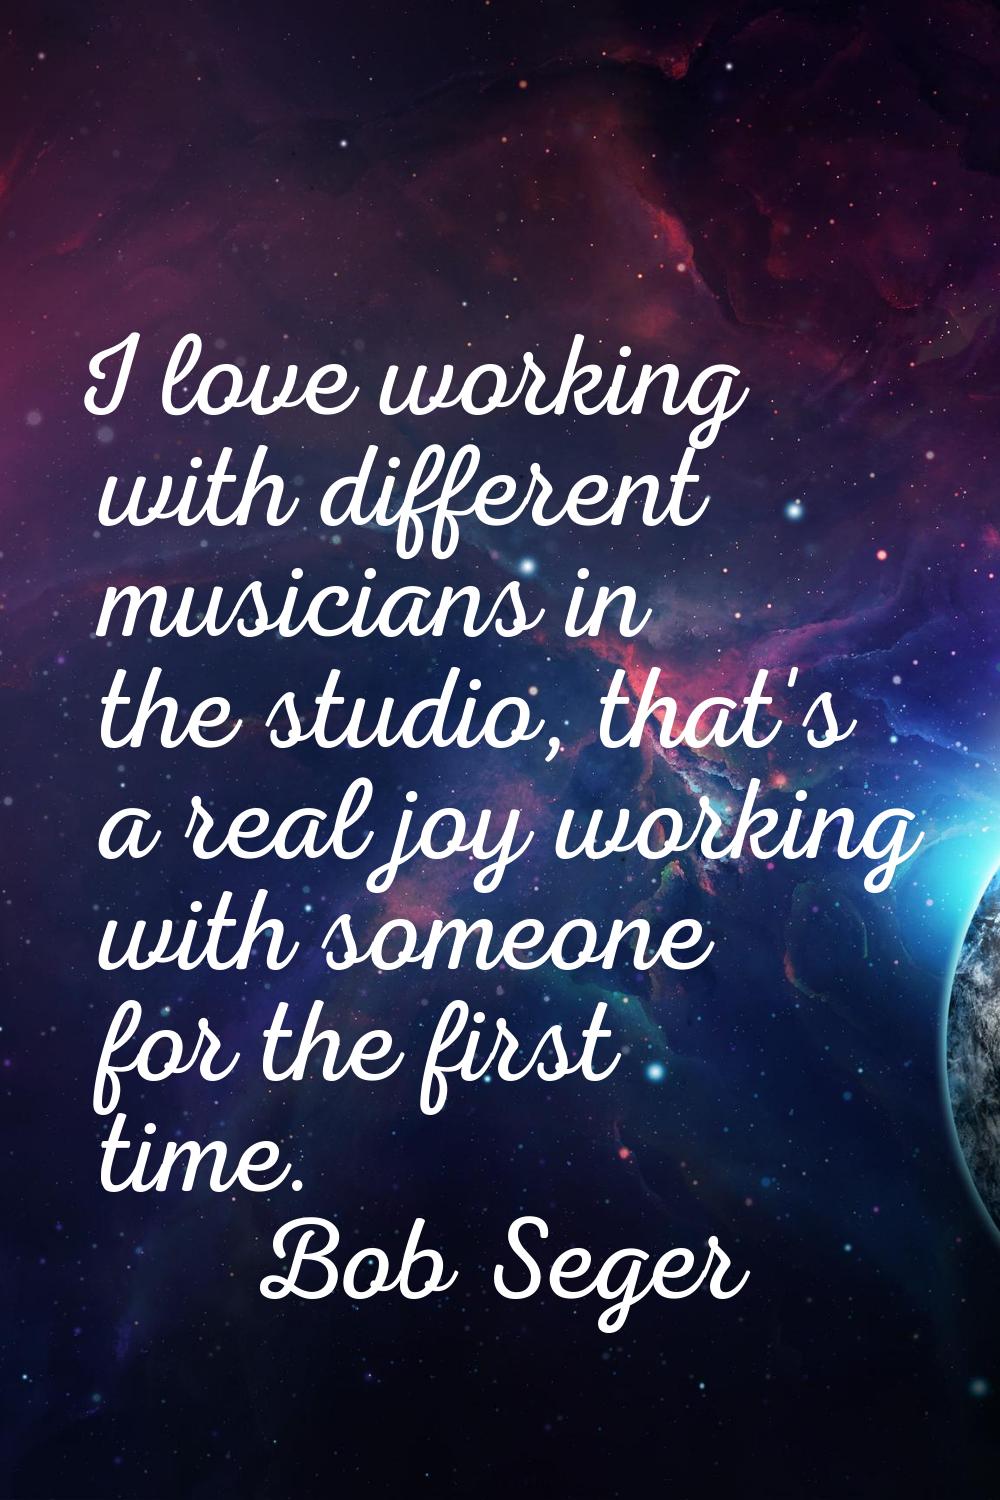 I love working with different musicians in the studio, that's a real joy working with someone for t